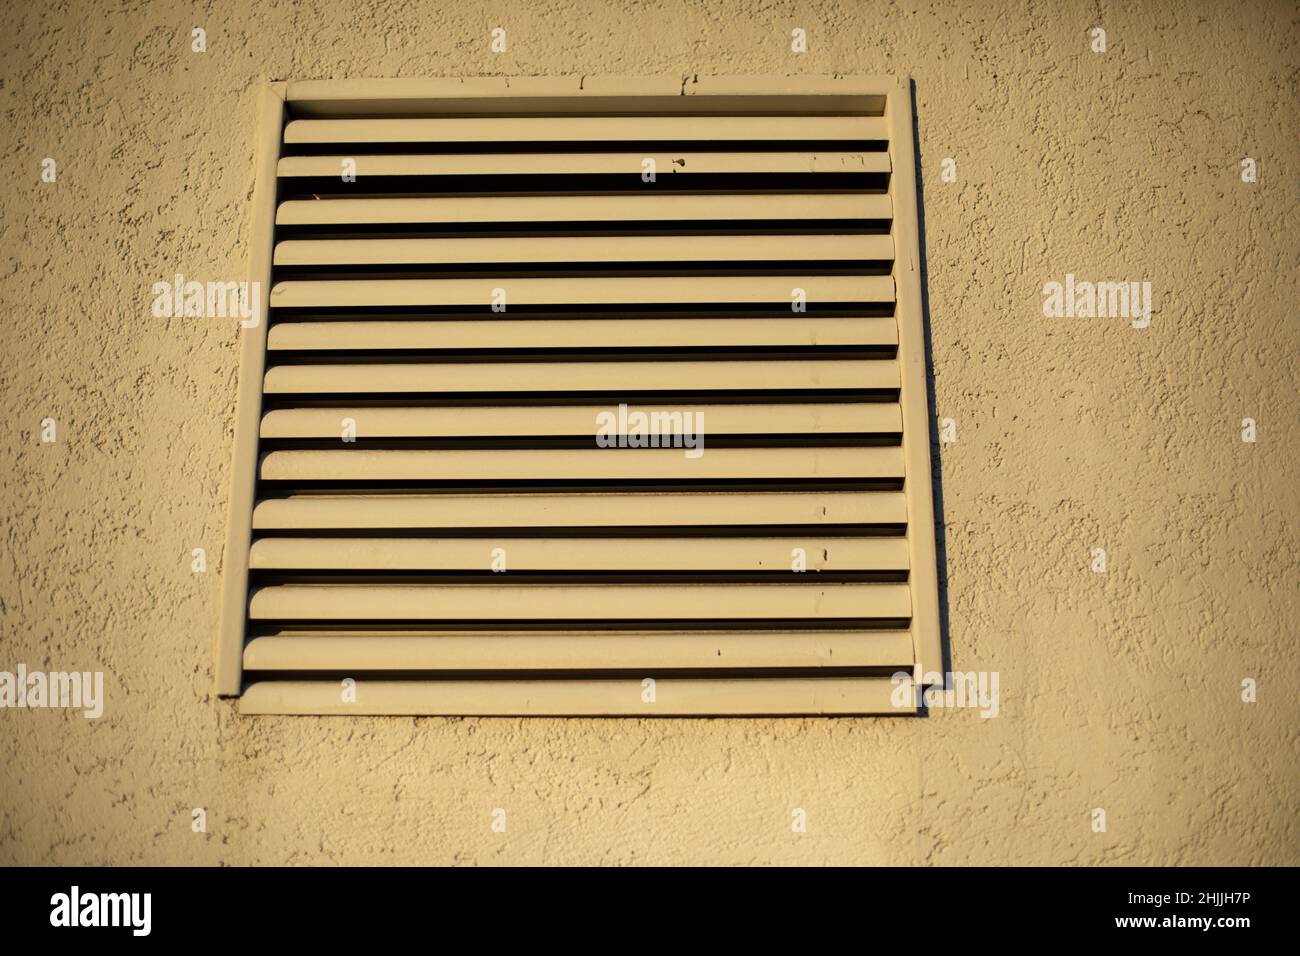 Ventilation outside building. Grille on building. Communications for air flow. Stock Photo